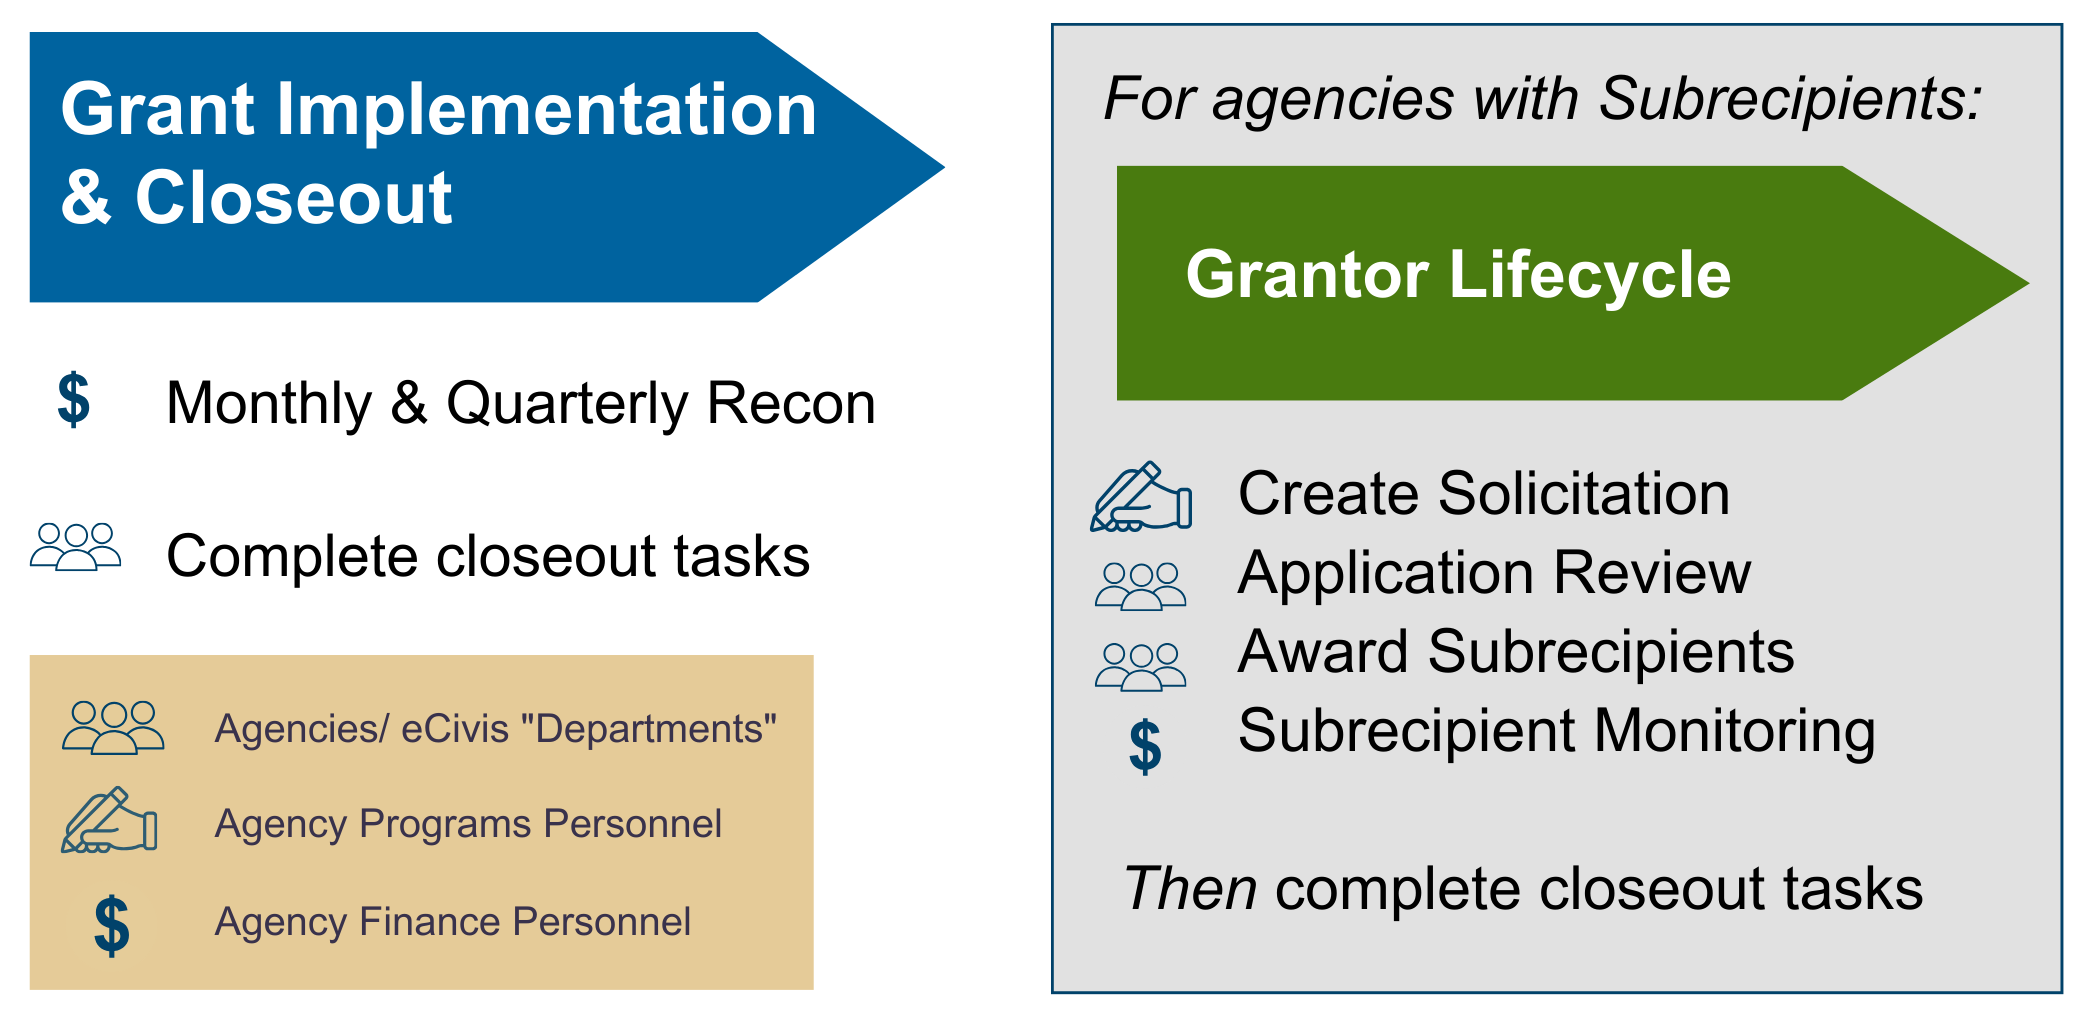 The final stages in eCivis Grants Network are Grant Implementation & Closeout, which include monthly & Quarterly Reconciliation prior to completing closeout tasks. If a grant will be used for pass-through funding to Subrecipients, though, an agency becomes a Grantor & will also be responsible for creating a solicitation, reviewing applications, award Subrecipients, & Subrecipient Monitoring before closeout can begin.